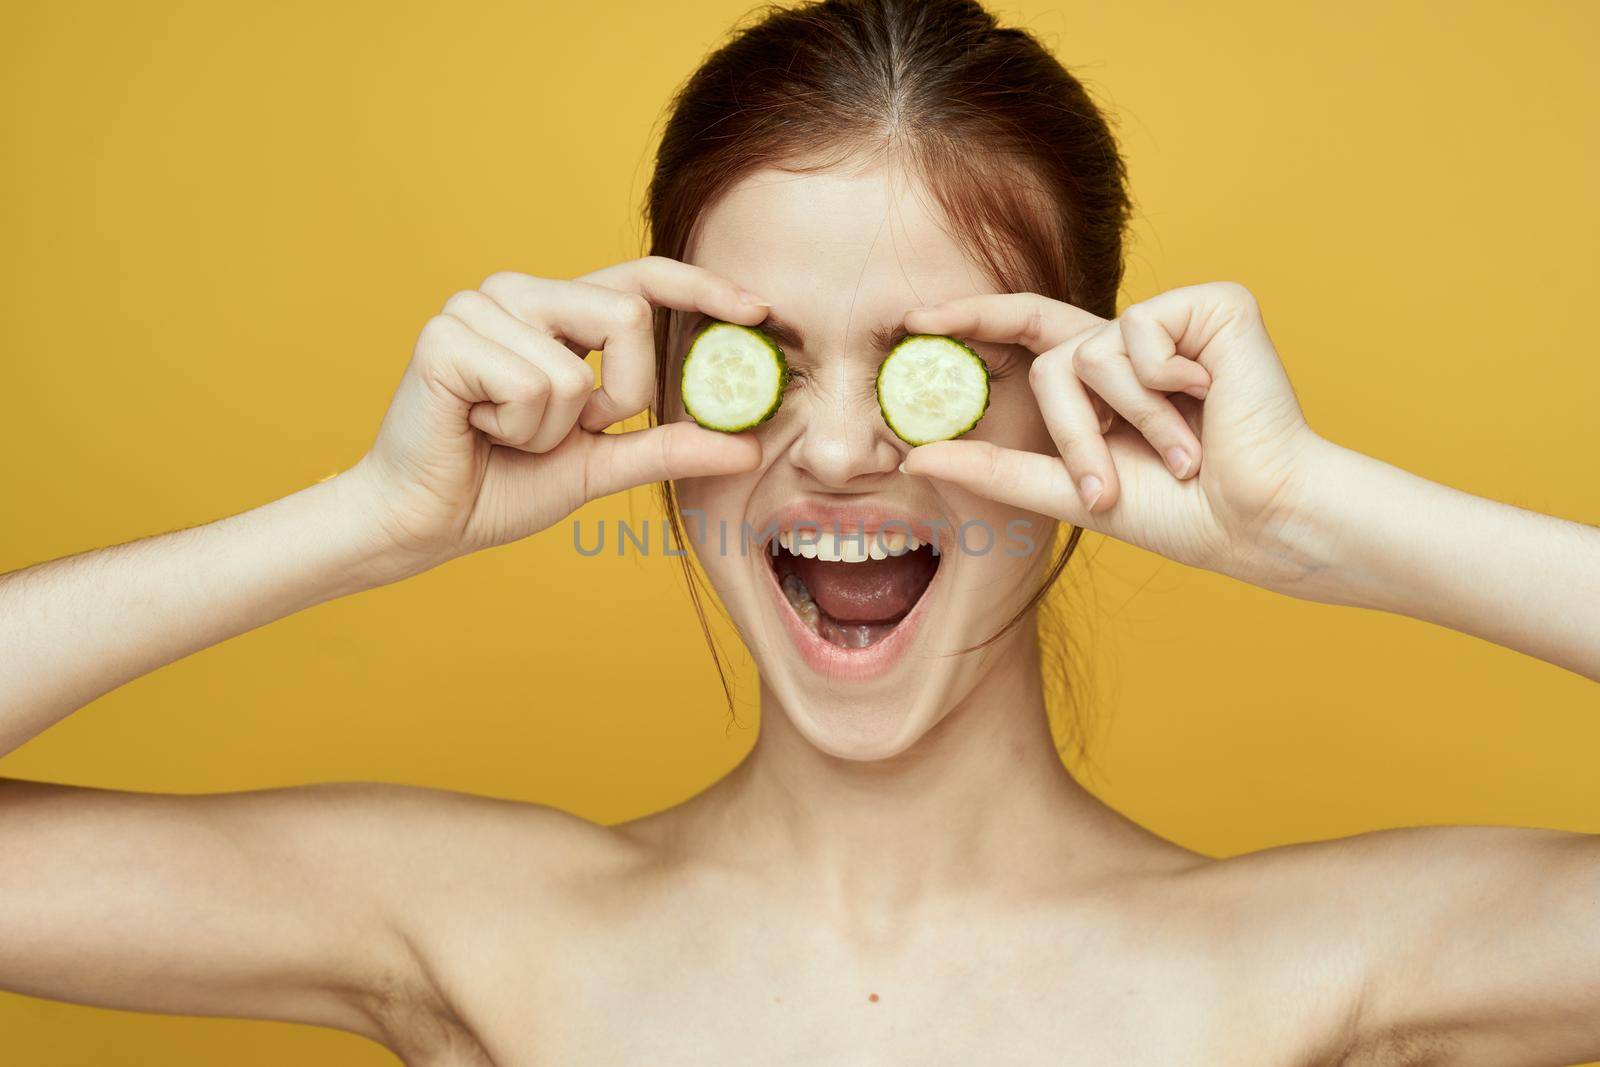 cheerful woman with cucumber vitamin skin care natural product. High quality photo